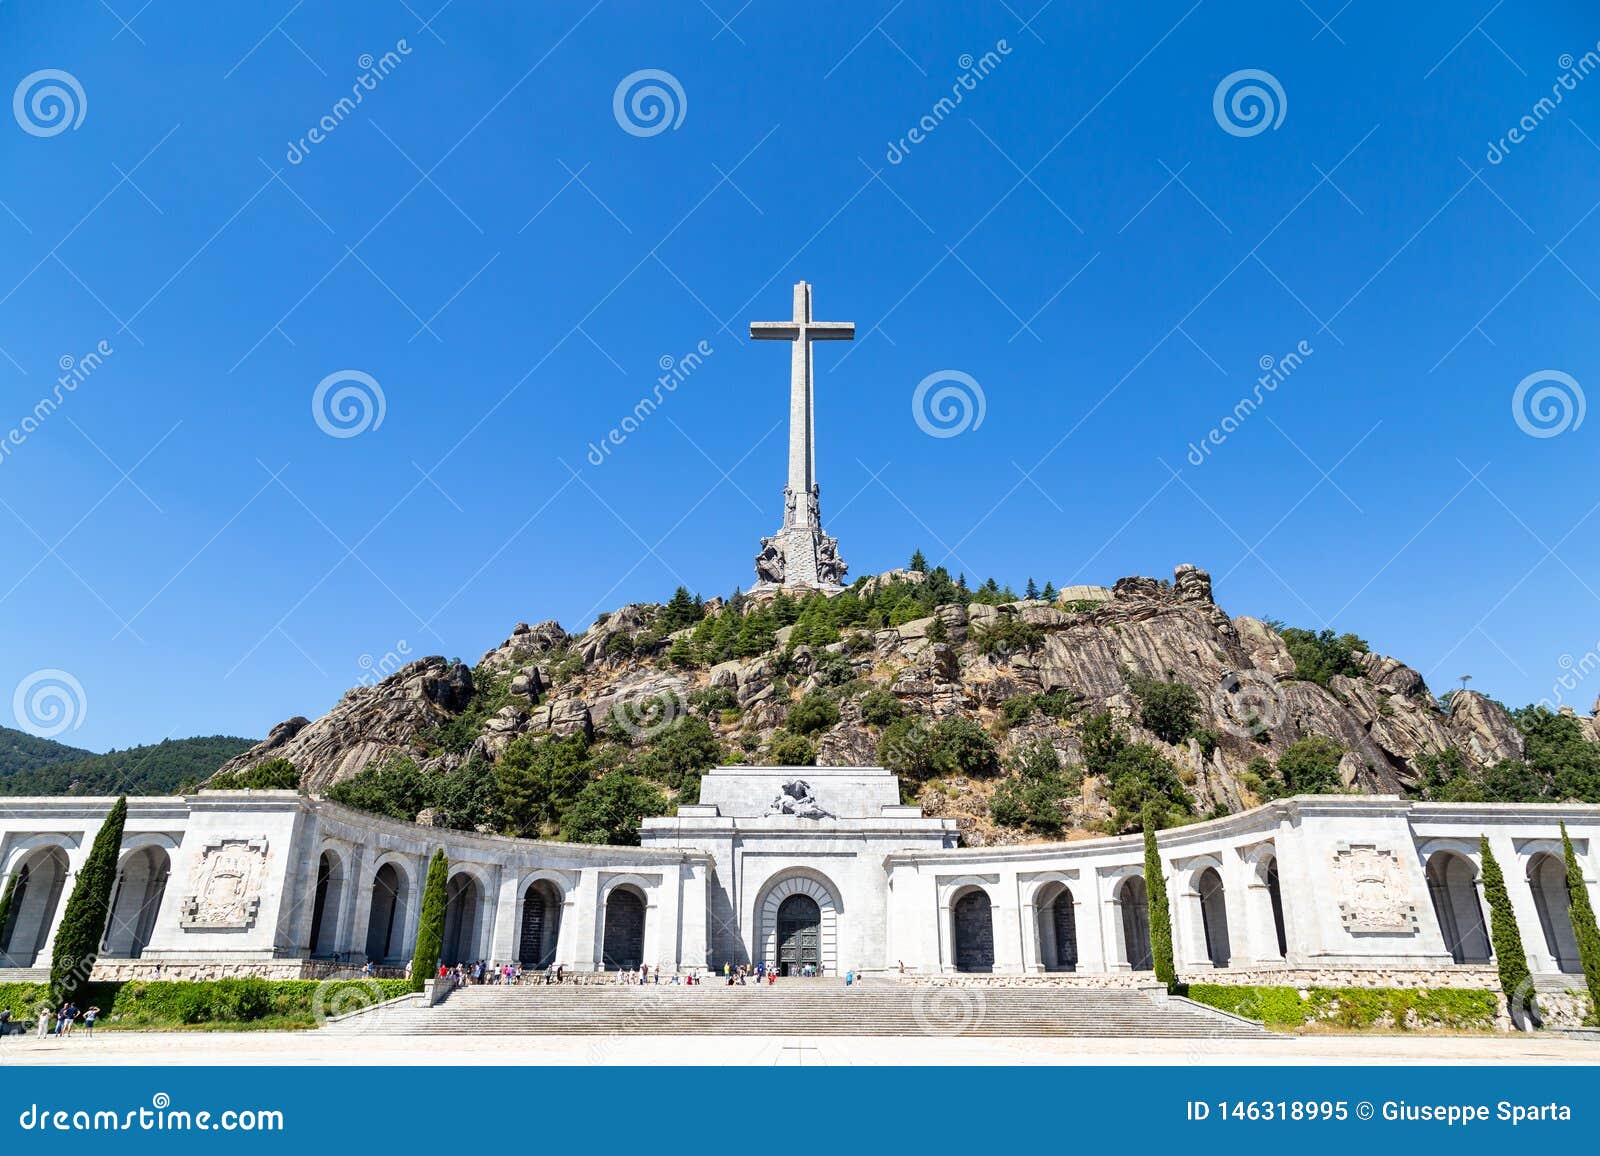 valley of the fallen valle de los caidos, the burying place of the dictator franco, madrid, spain